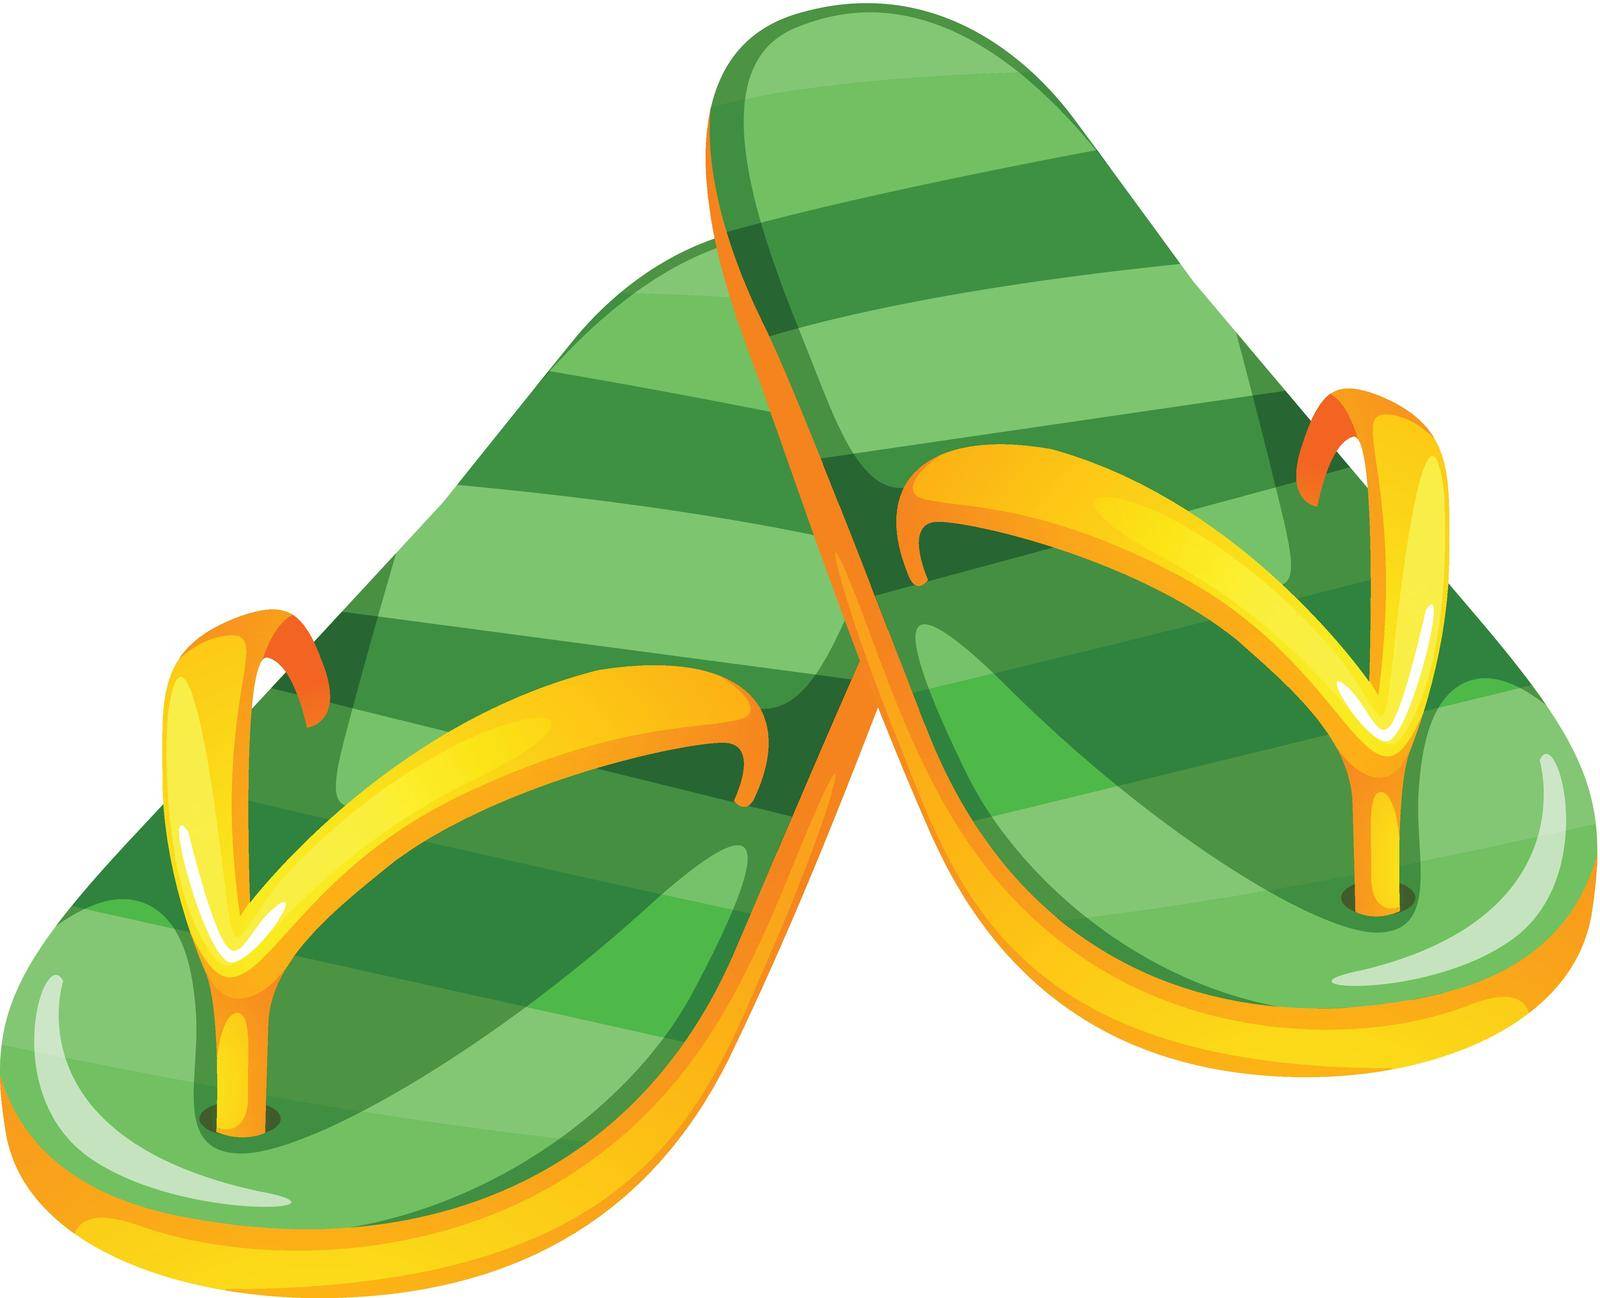 A pair of green slippers by iimages